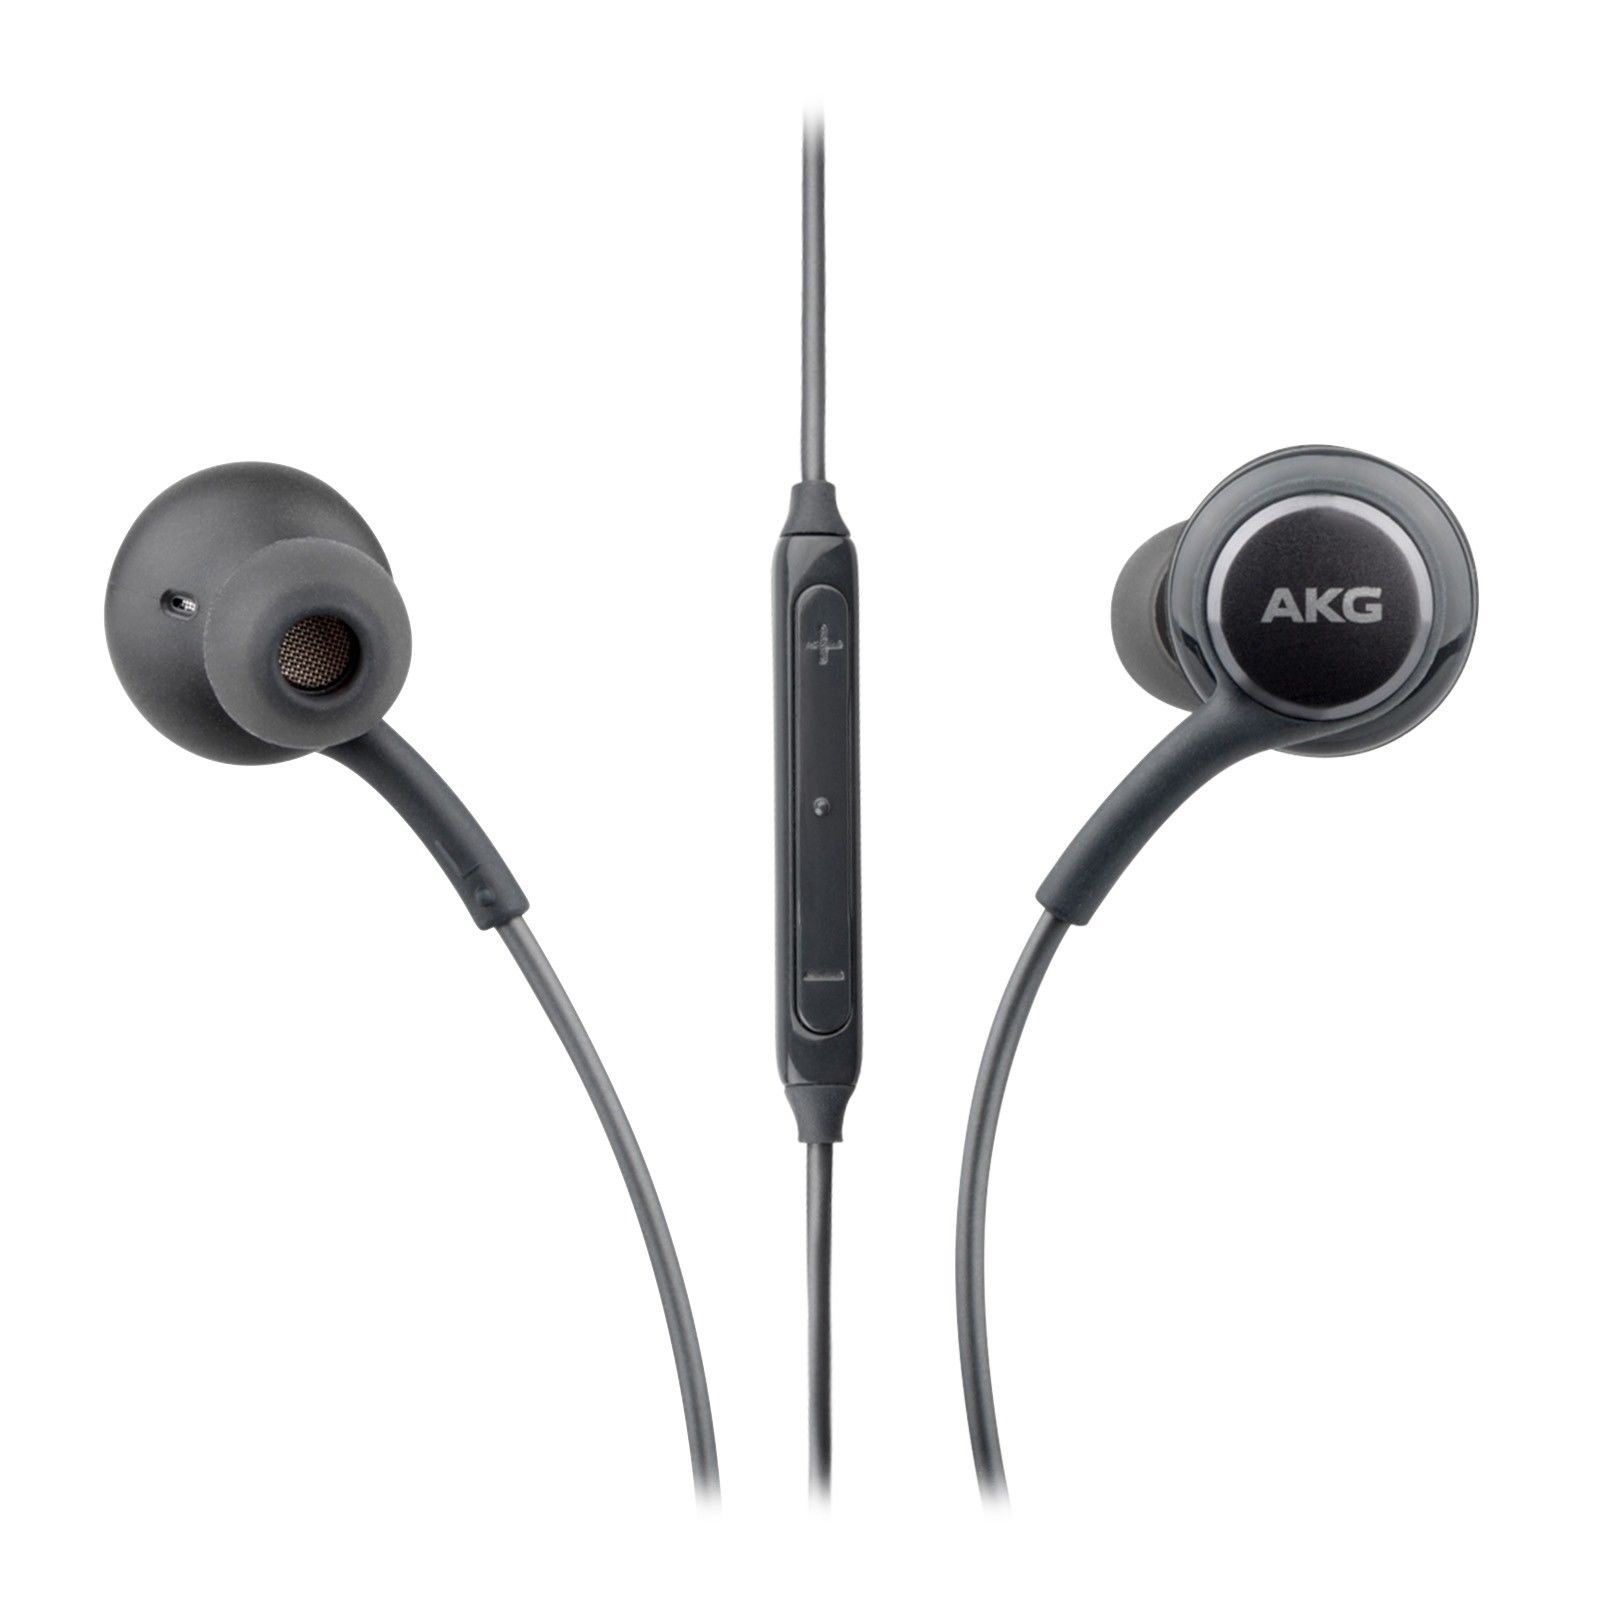 Price drop! Samsung premium in-ear headphones with in-line mic for $5